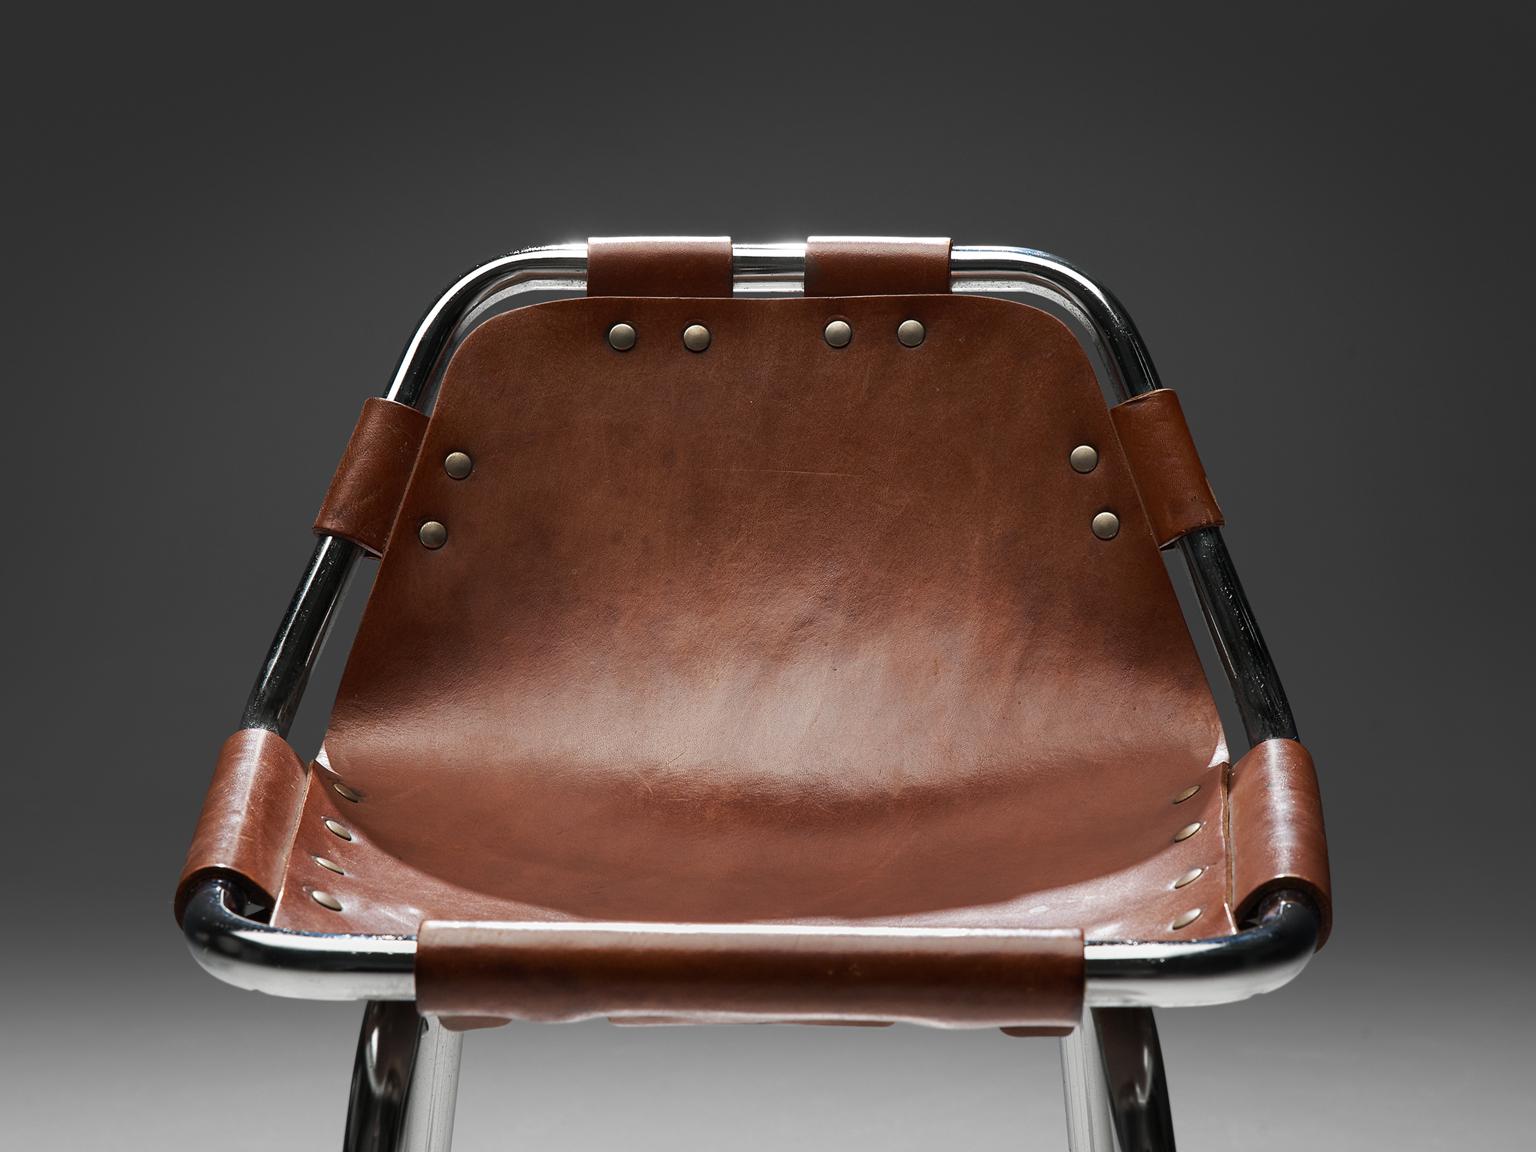 Steel Cognac Leather Stools Selected by Charlotte Perriand